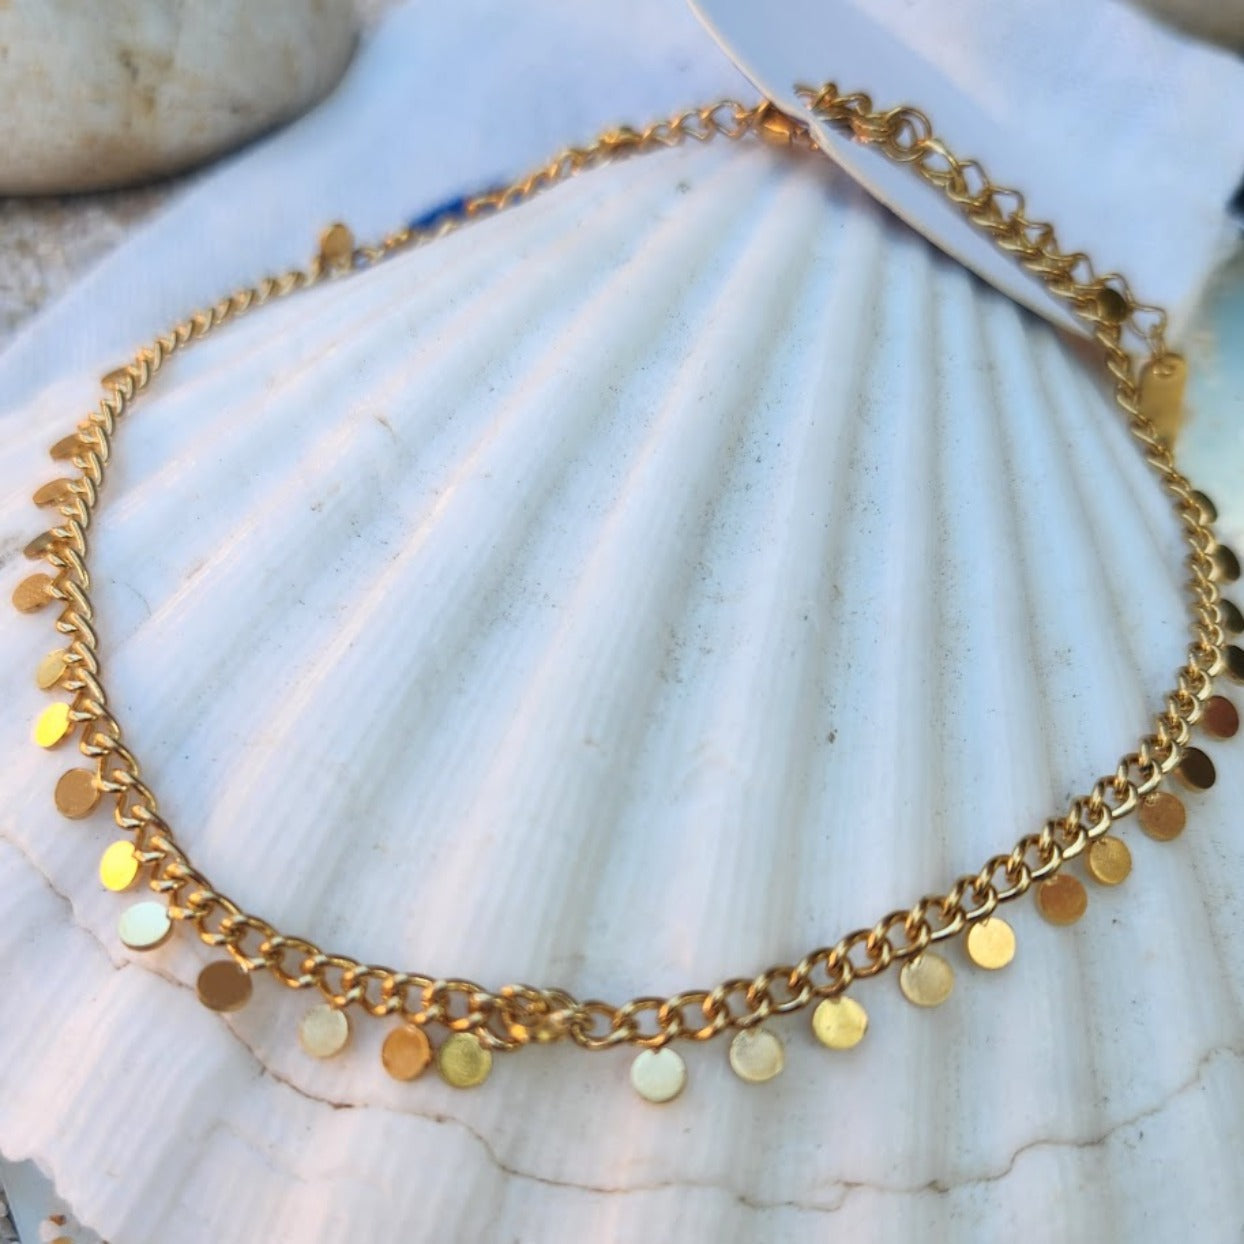 LE PENNIES SILVER OR GOLD - WATERPROOF BEACH BOHO ANKLETS - Premium anklets from www.beachboho.com.au - Just $59! Shop now at www.beachboho.com.au